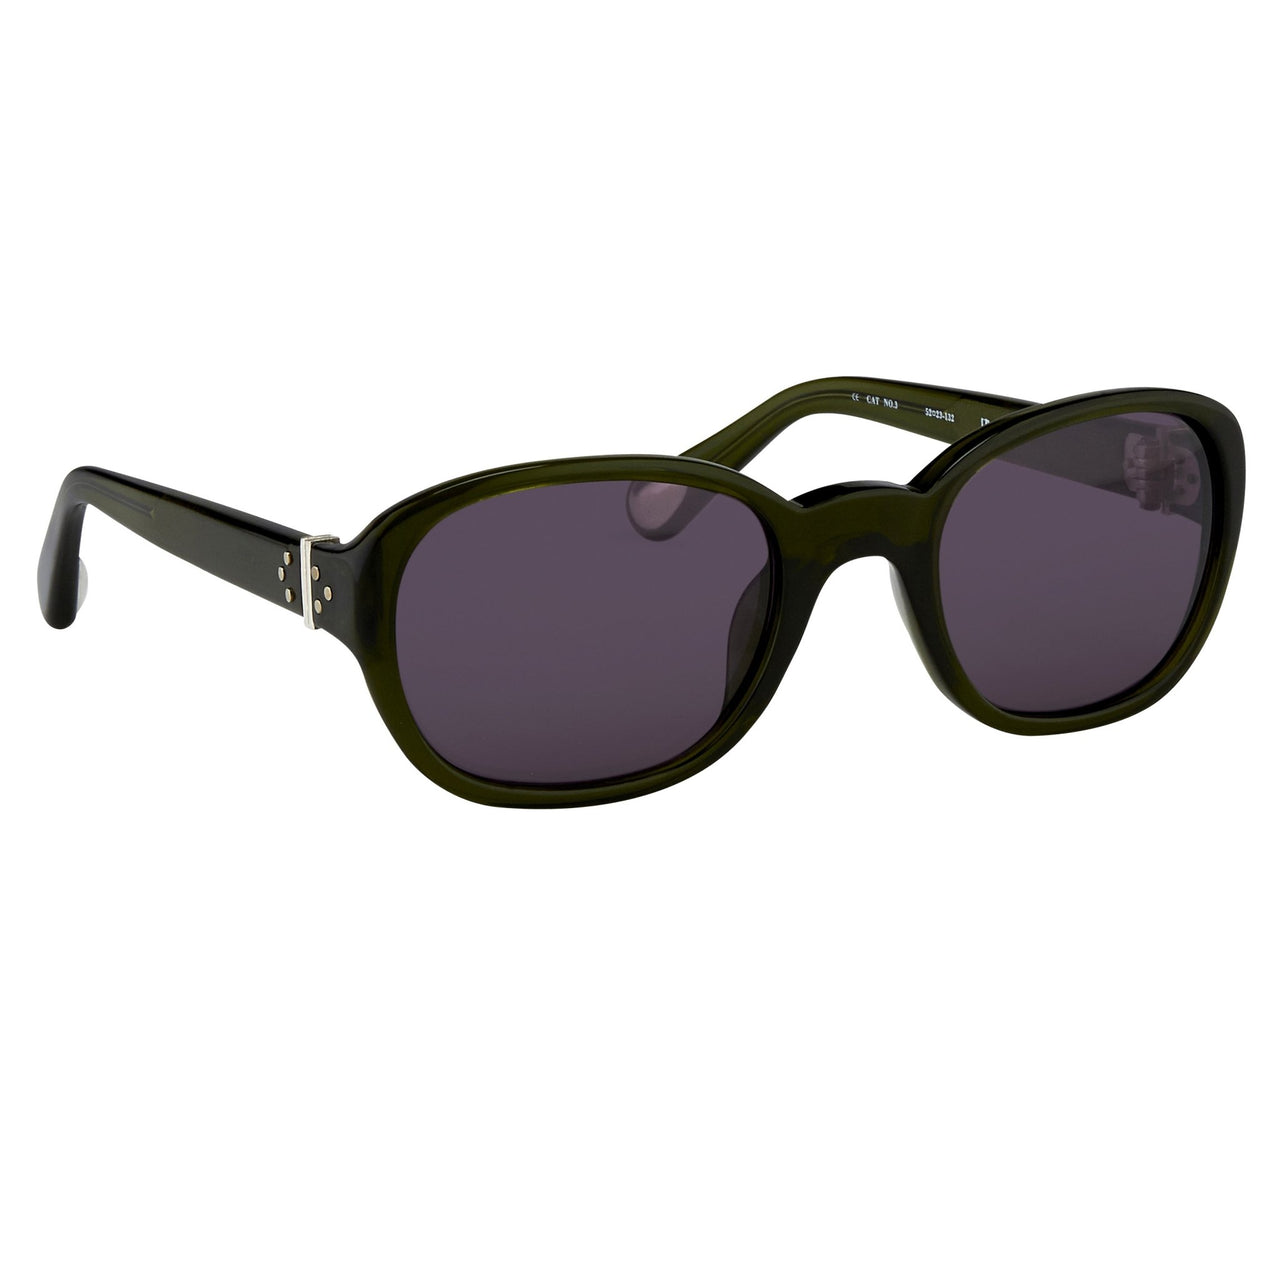 Ann Demeulemeester Sunglasses Oval Green 925 Silver with Purple Lenses Category 3 AD8C7SUN - Watches & Crystals